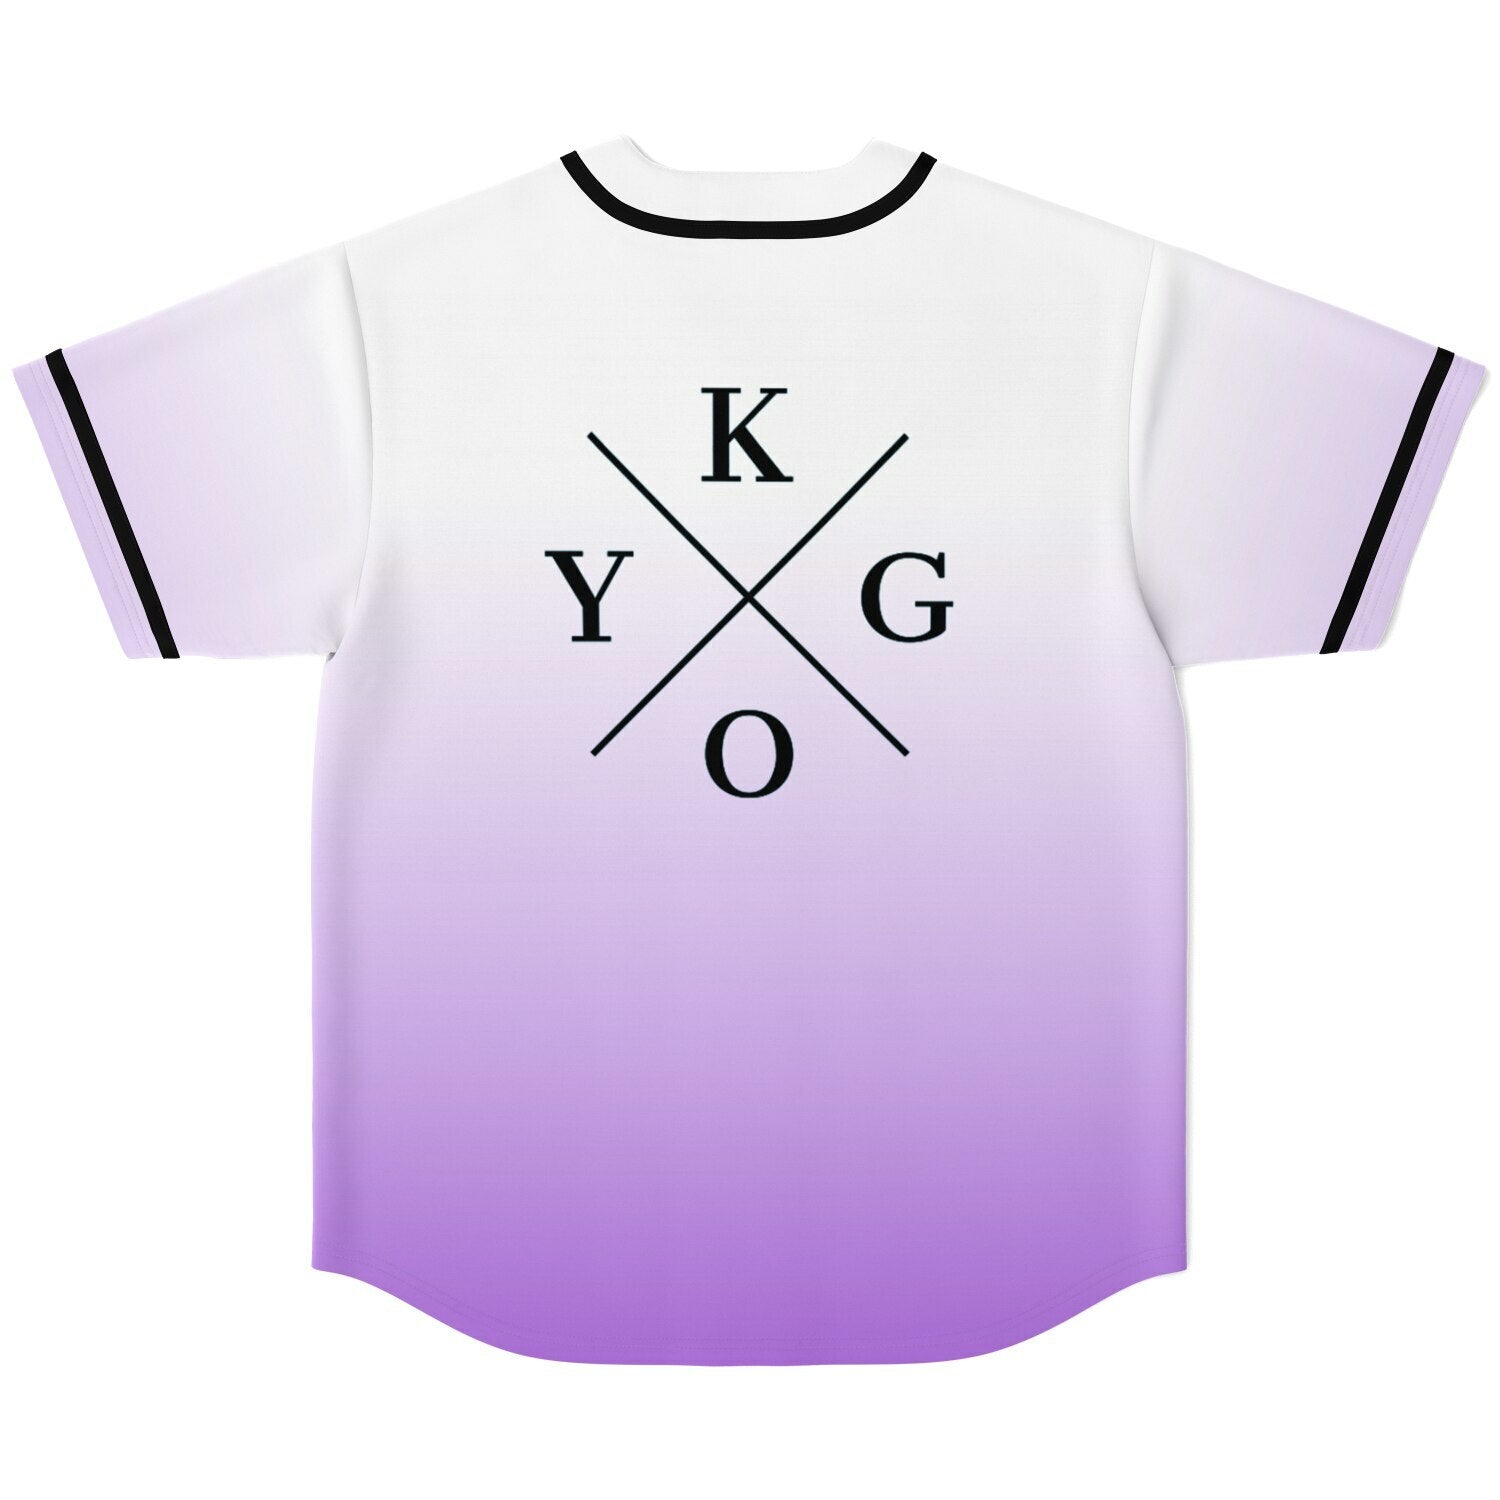 White and purple gradient baseball jersey with black trim and KYGO logo on the back